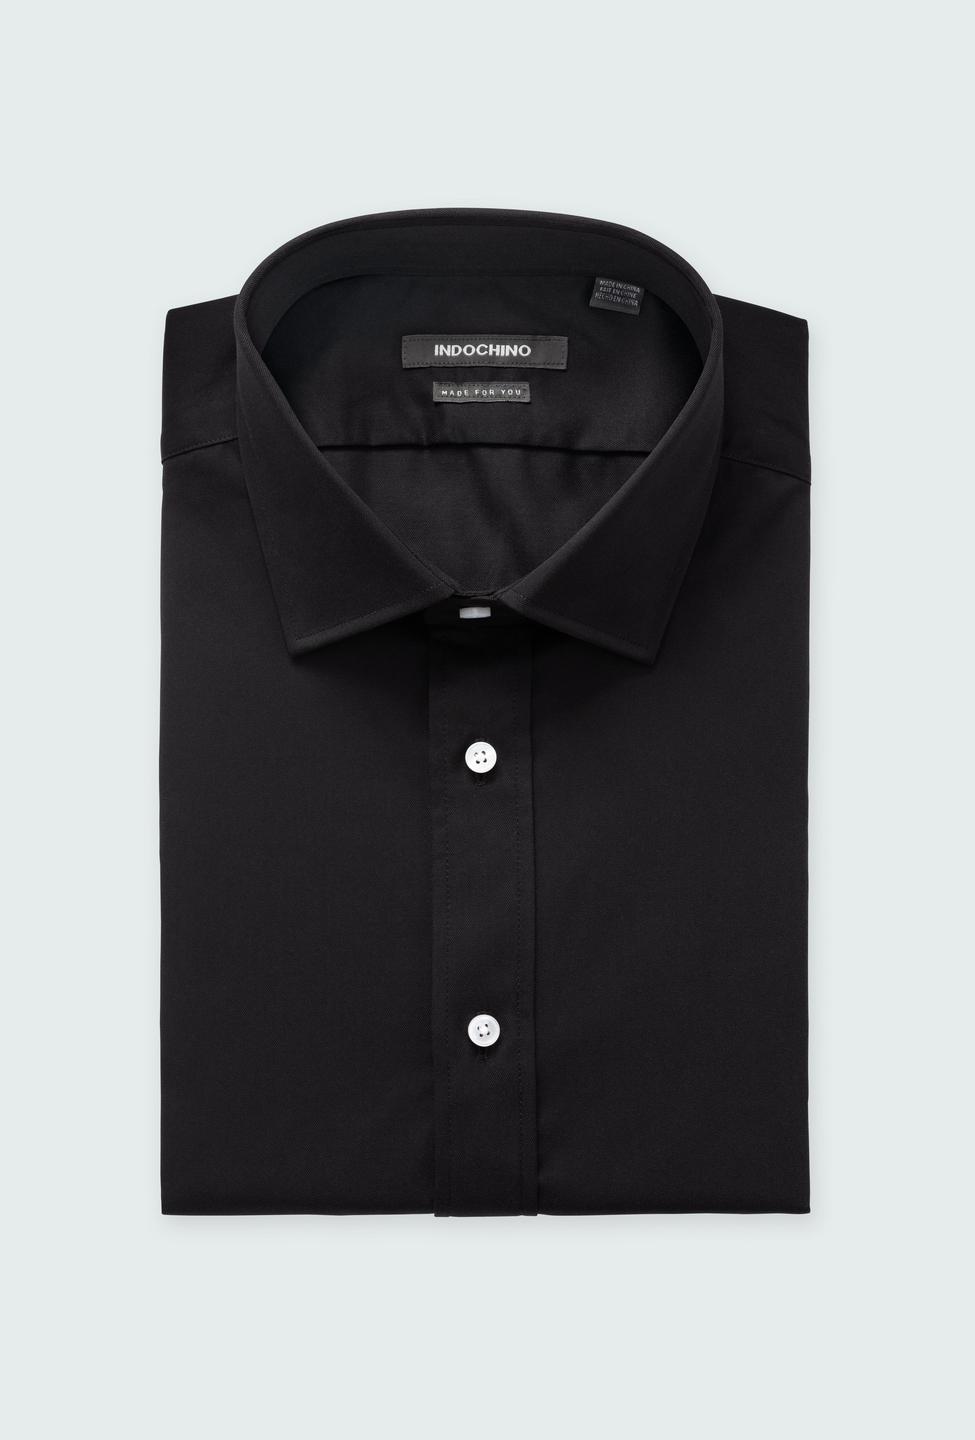 Black shirt - Hyde Solid Design from Luxury Indochino Collection